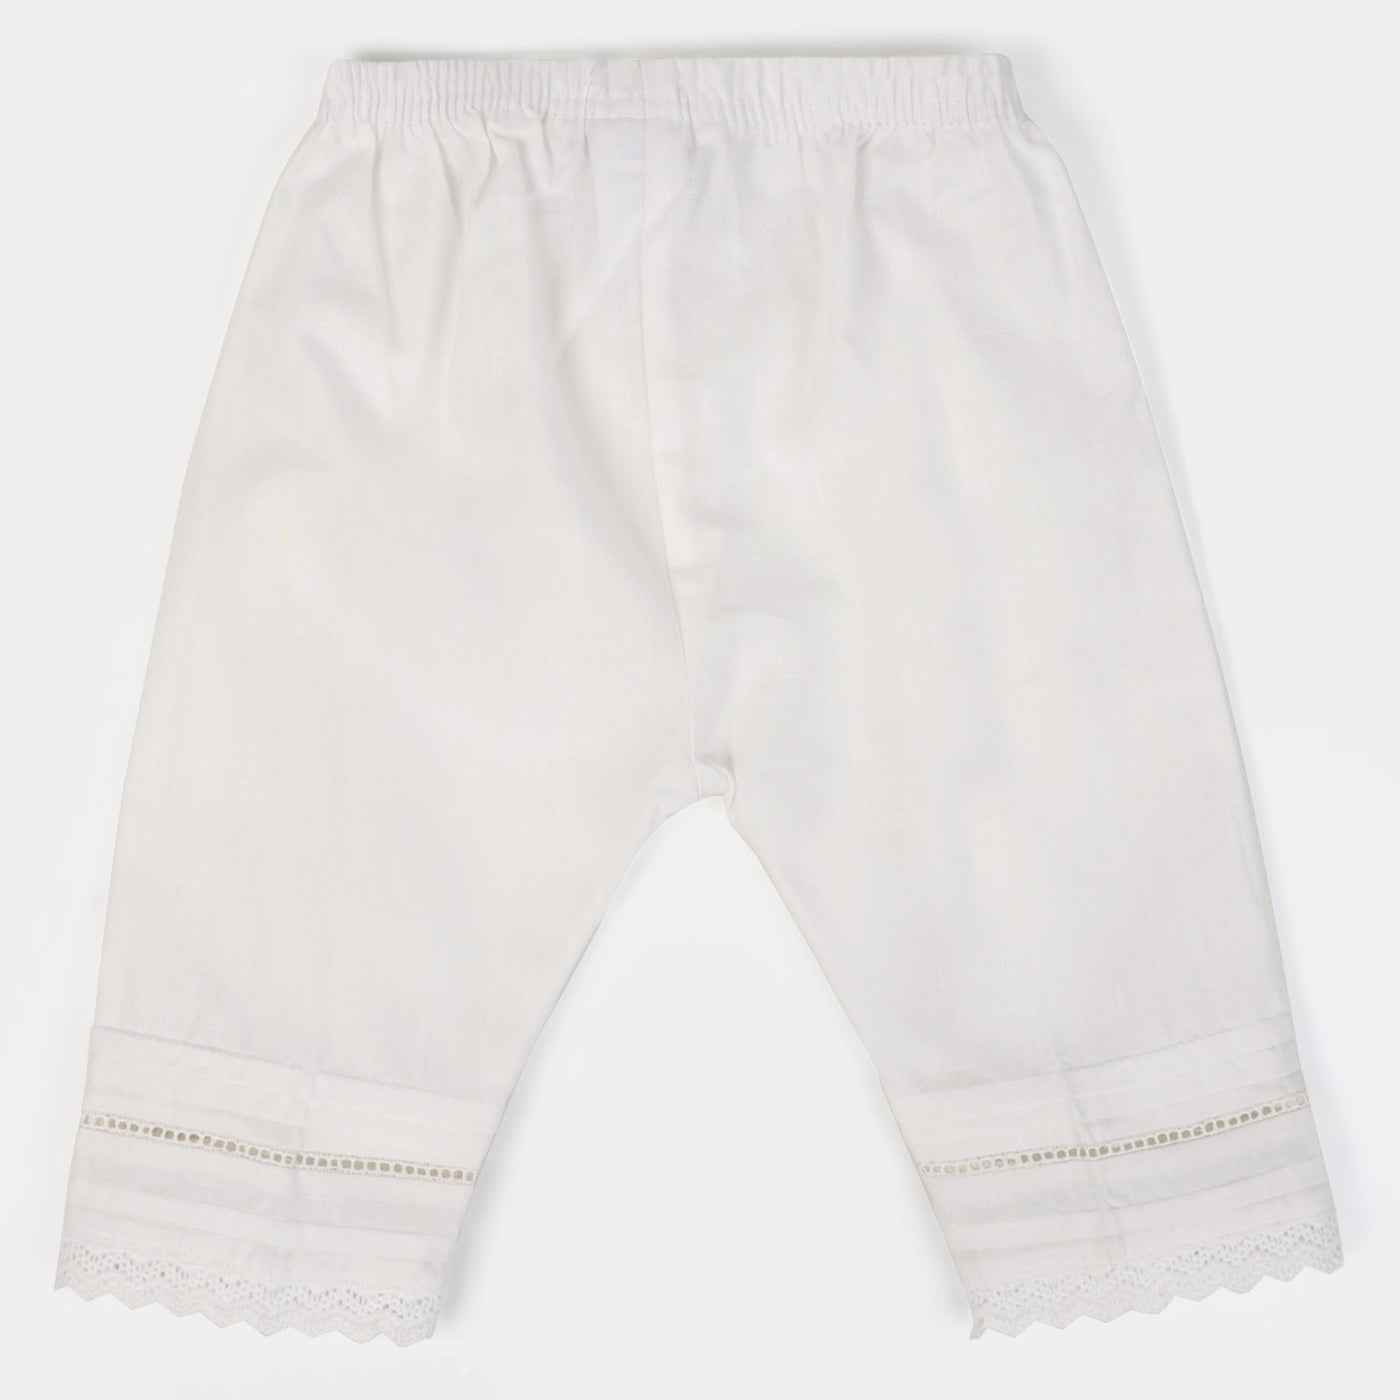 Infant Girls Cotton Pant Pleat With Lace  - White